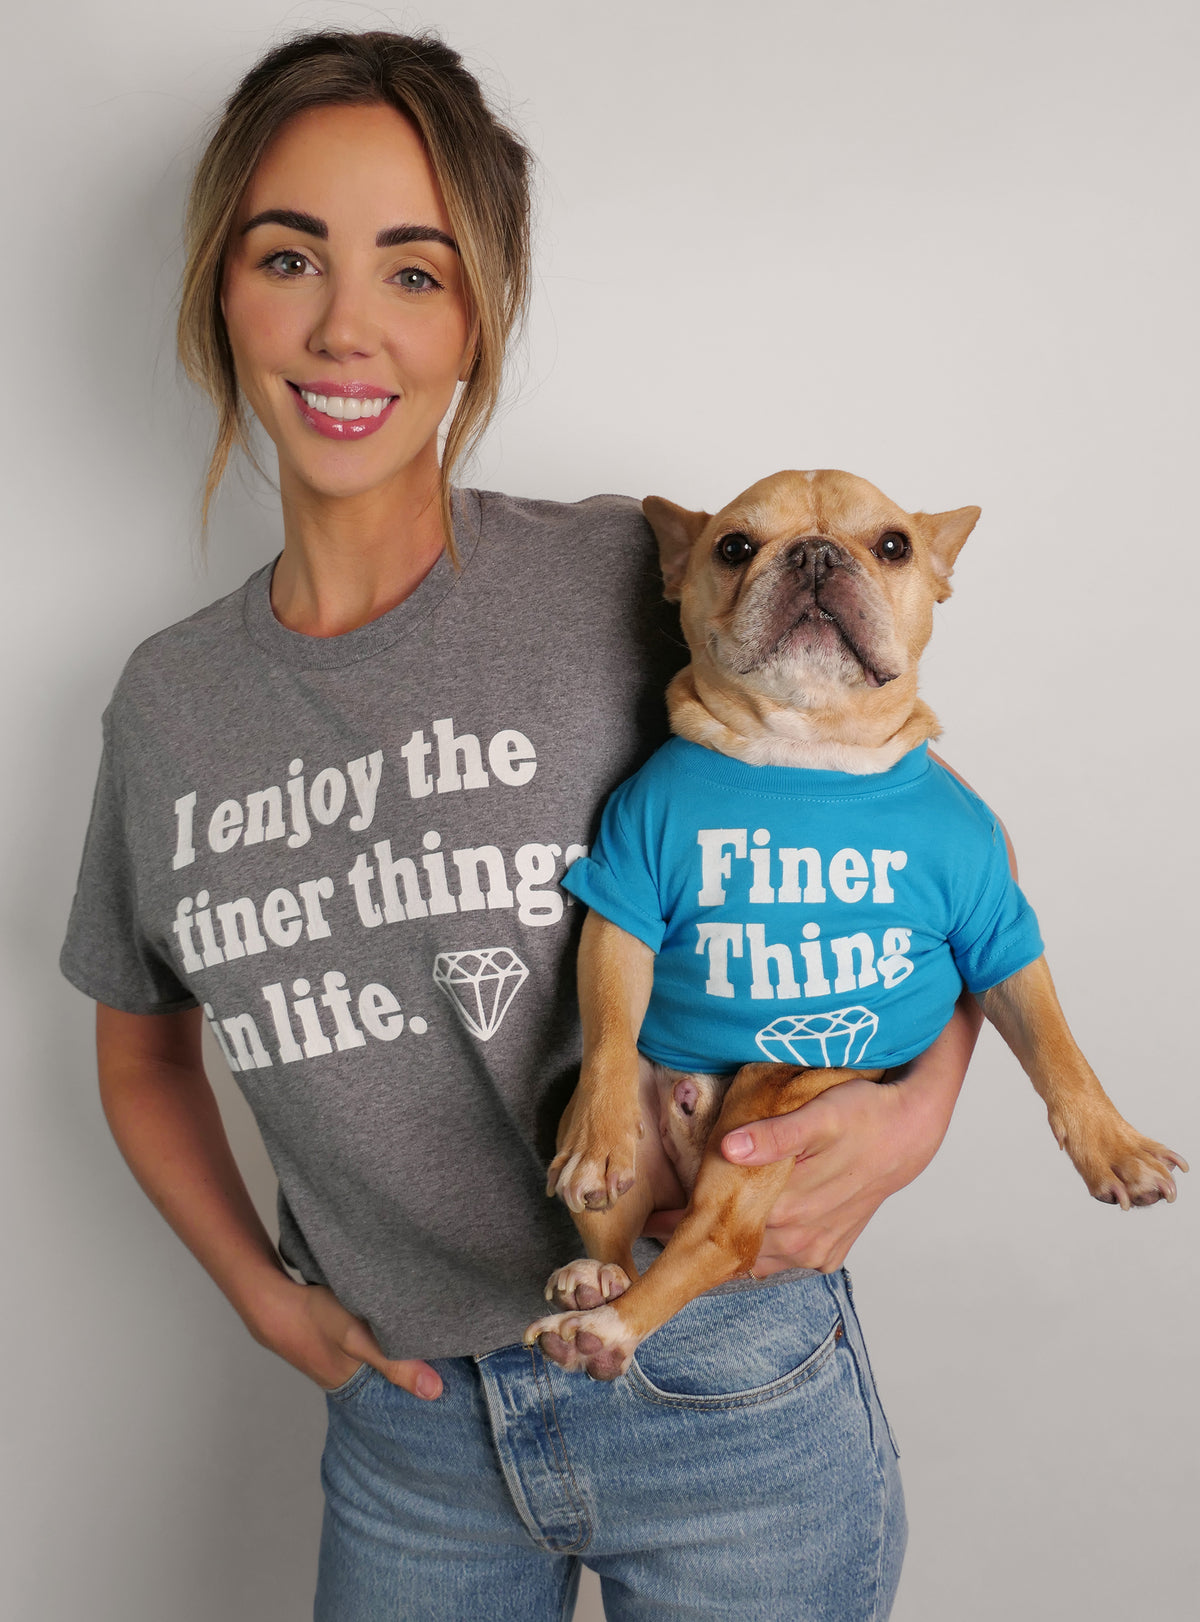 I Enjoy the Finer Things in Life Tee